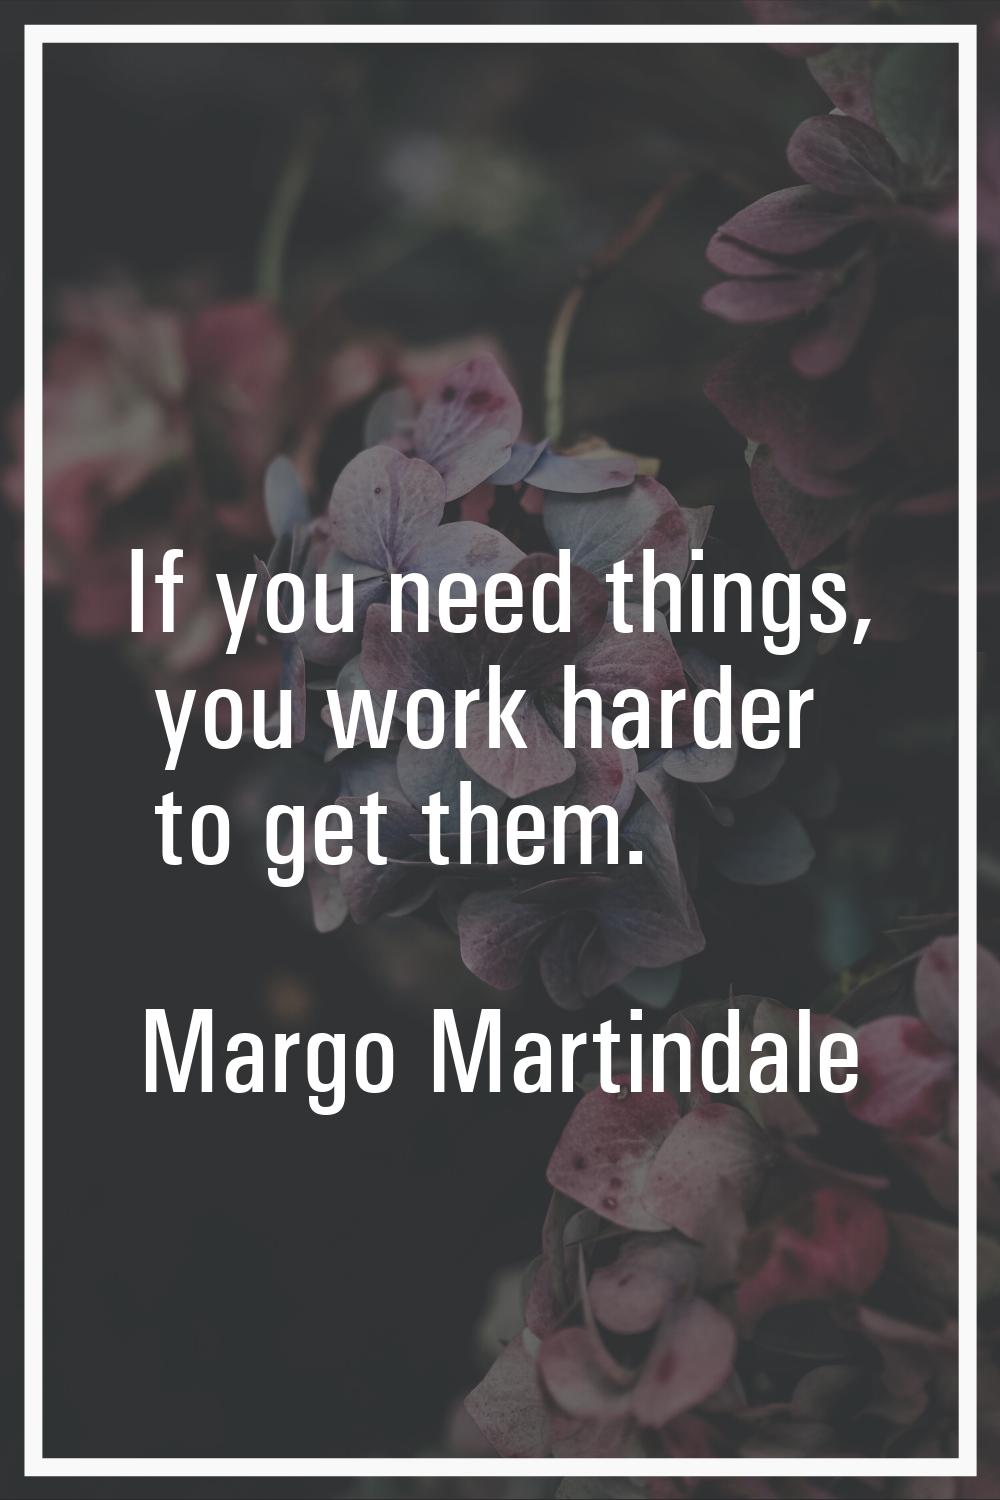 If you need things, you work harder to get them.